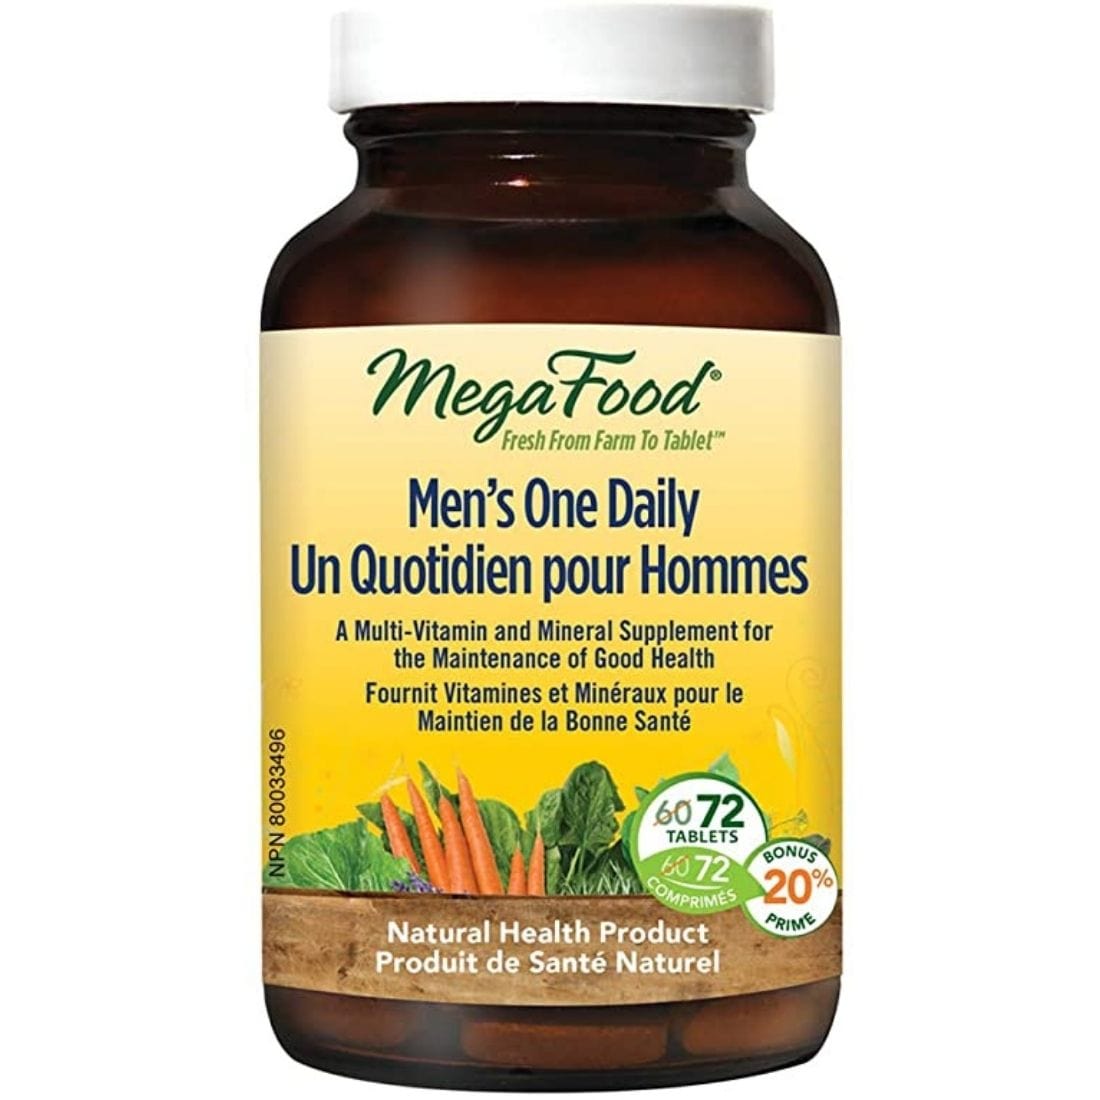 MegaFood Men's One Daily Multivitamin & Mineral